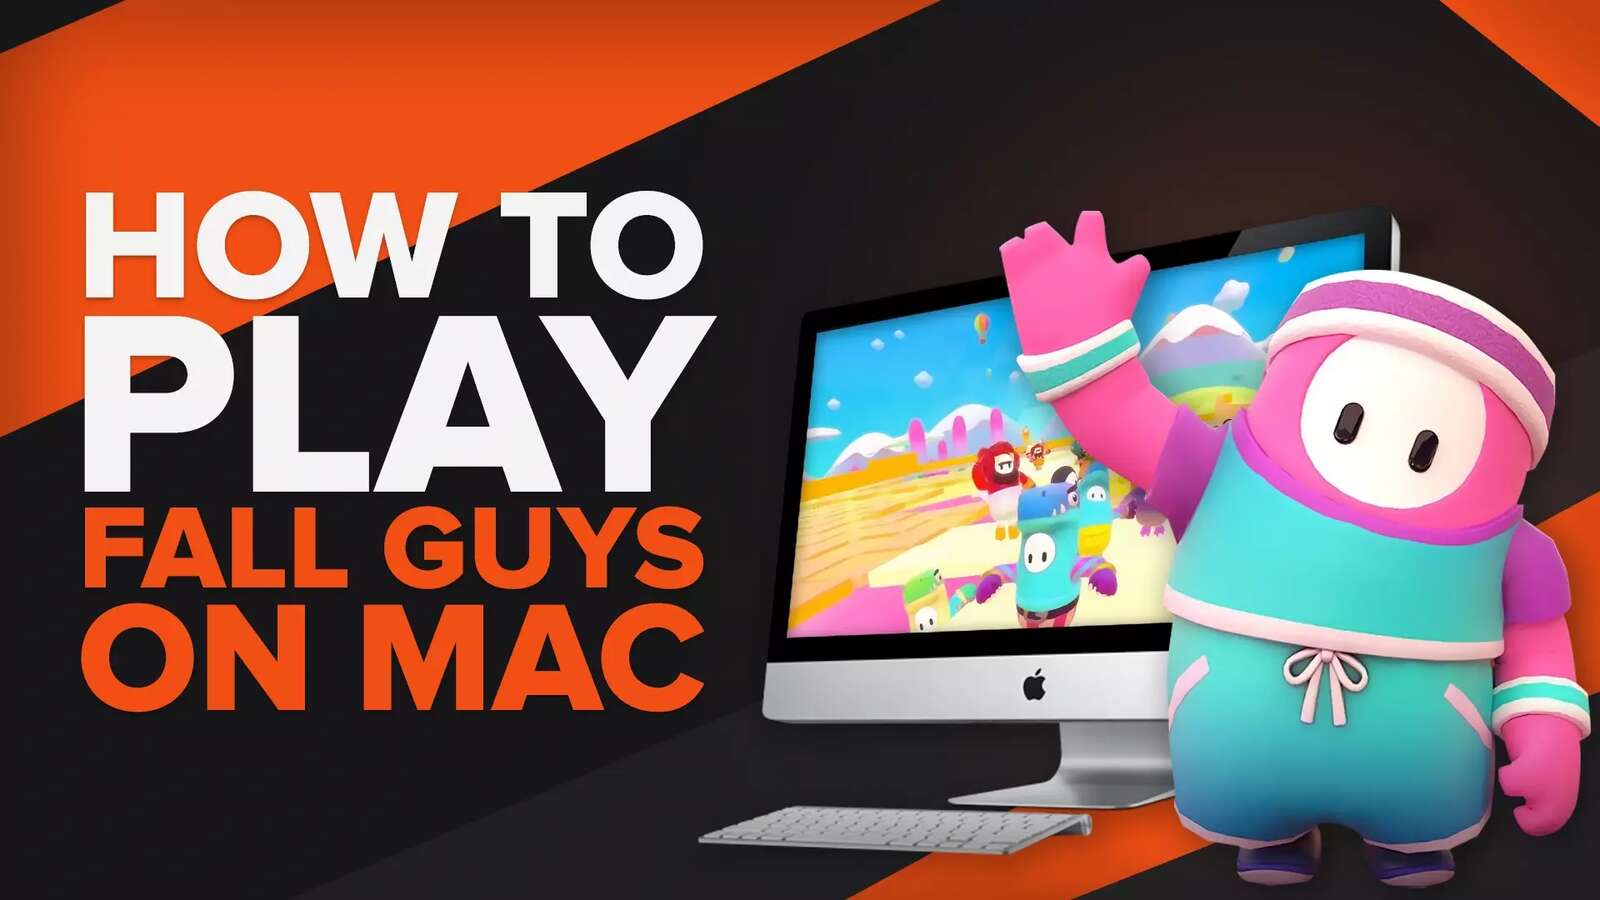 The 3 Best Ways To Play Fall Guys on Mac